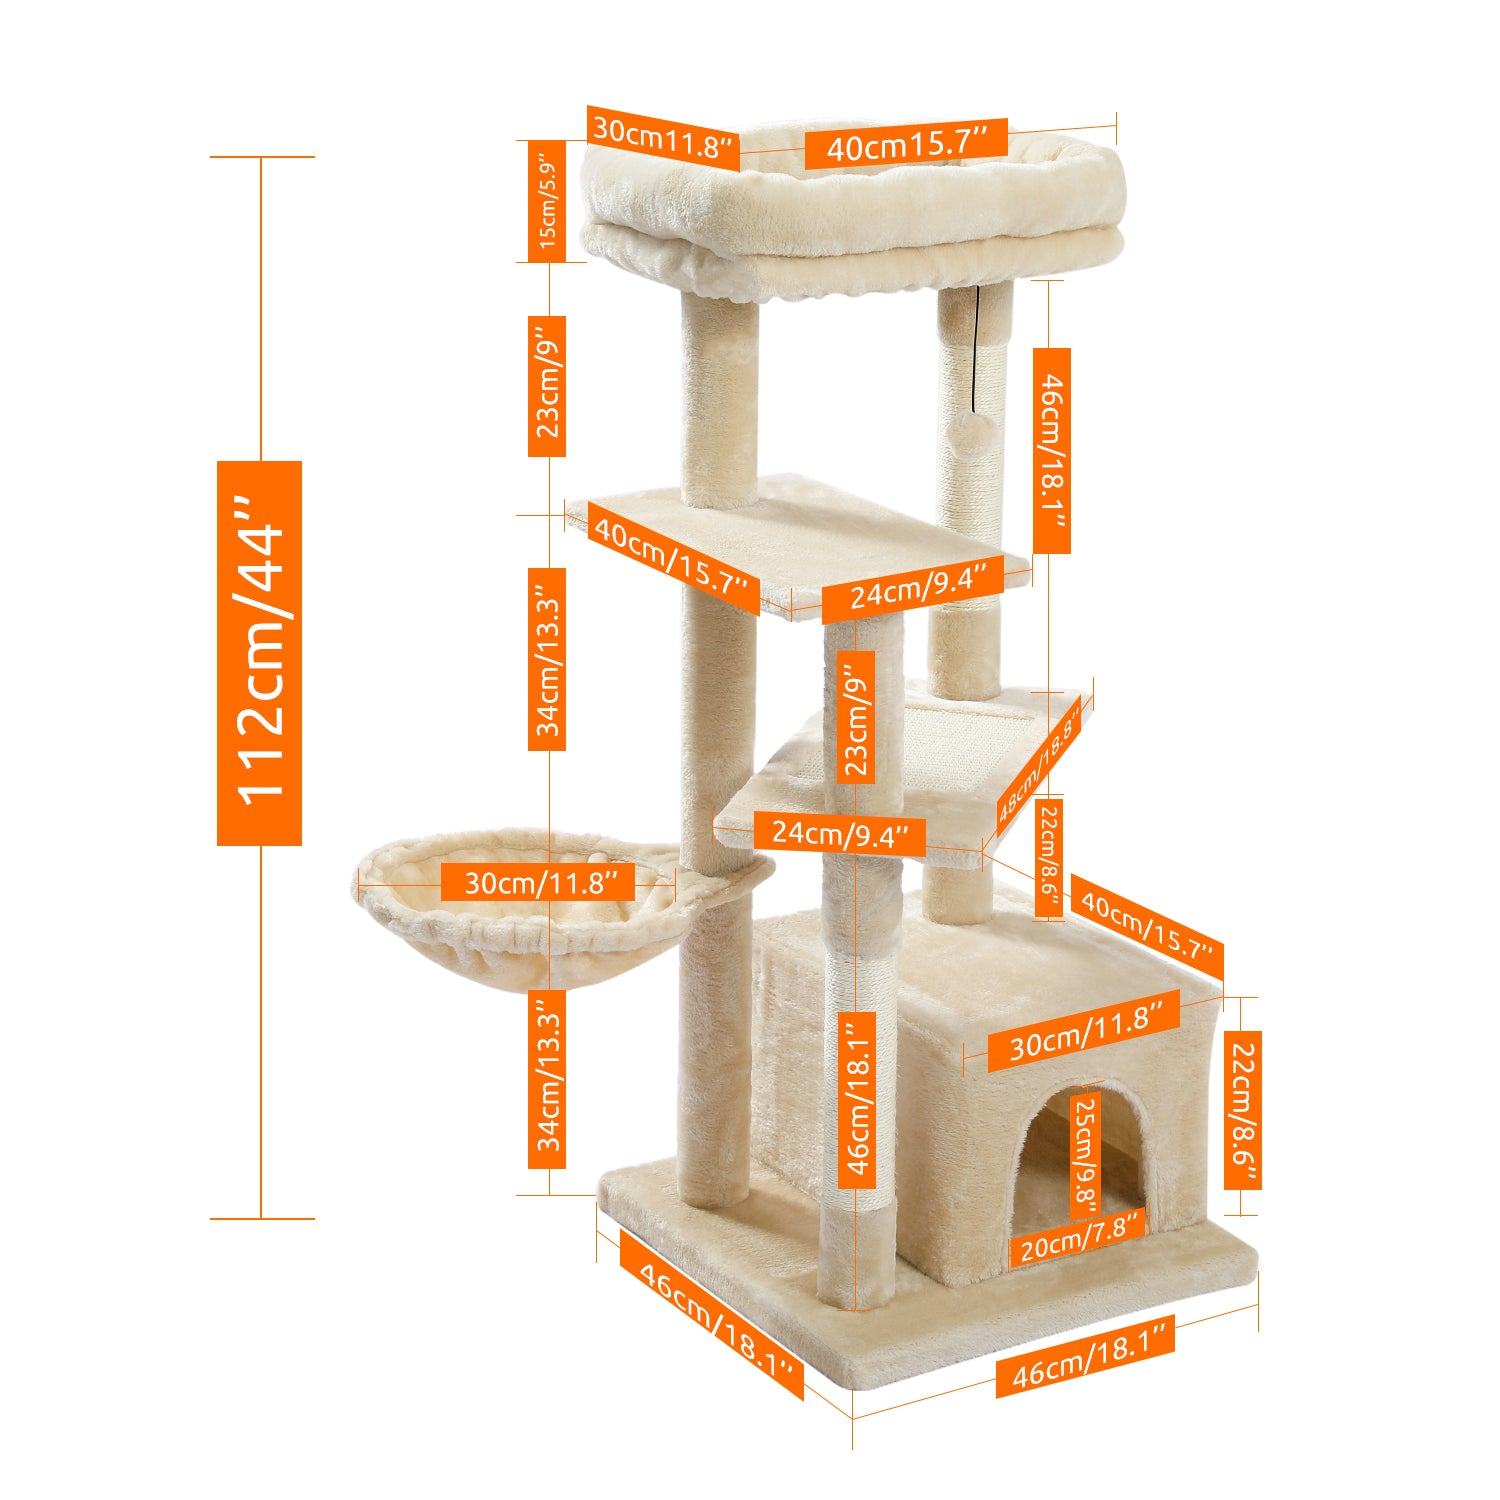 Multi-Level Modern Cat Tree with Scratching Post, Cozy Condo, Top Perch, Hammock and Dangling Ball For Small to Medium Cats - TOYSHIP